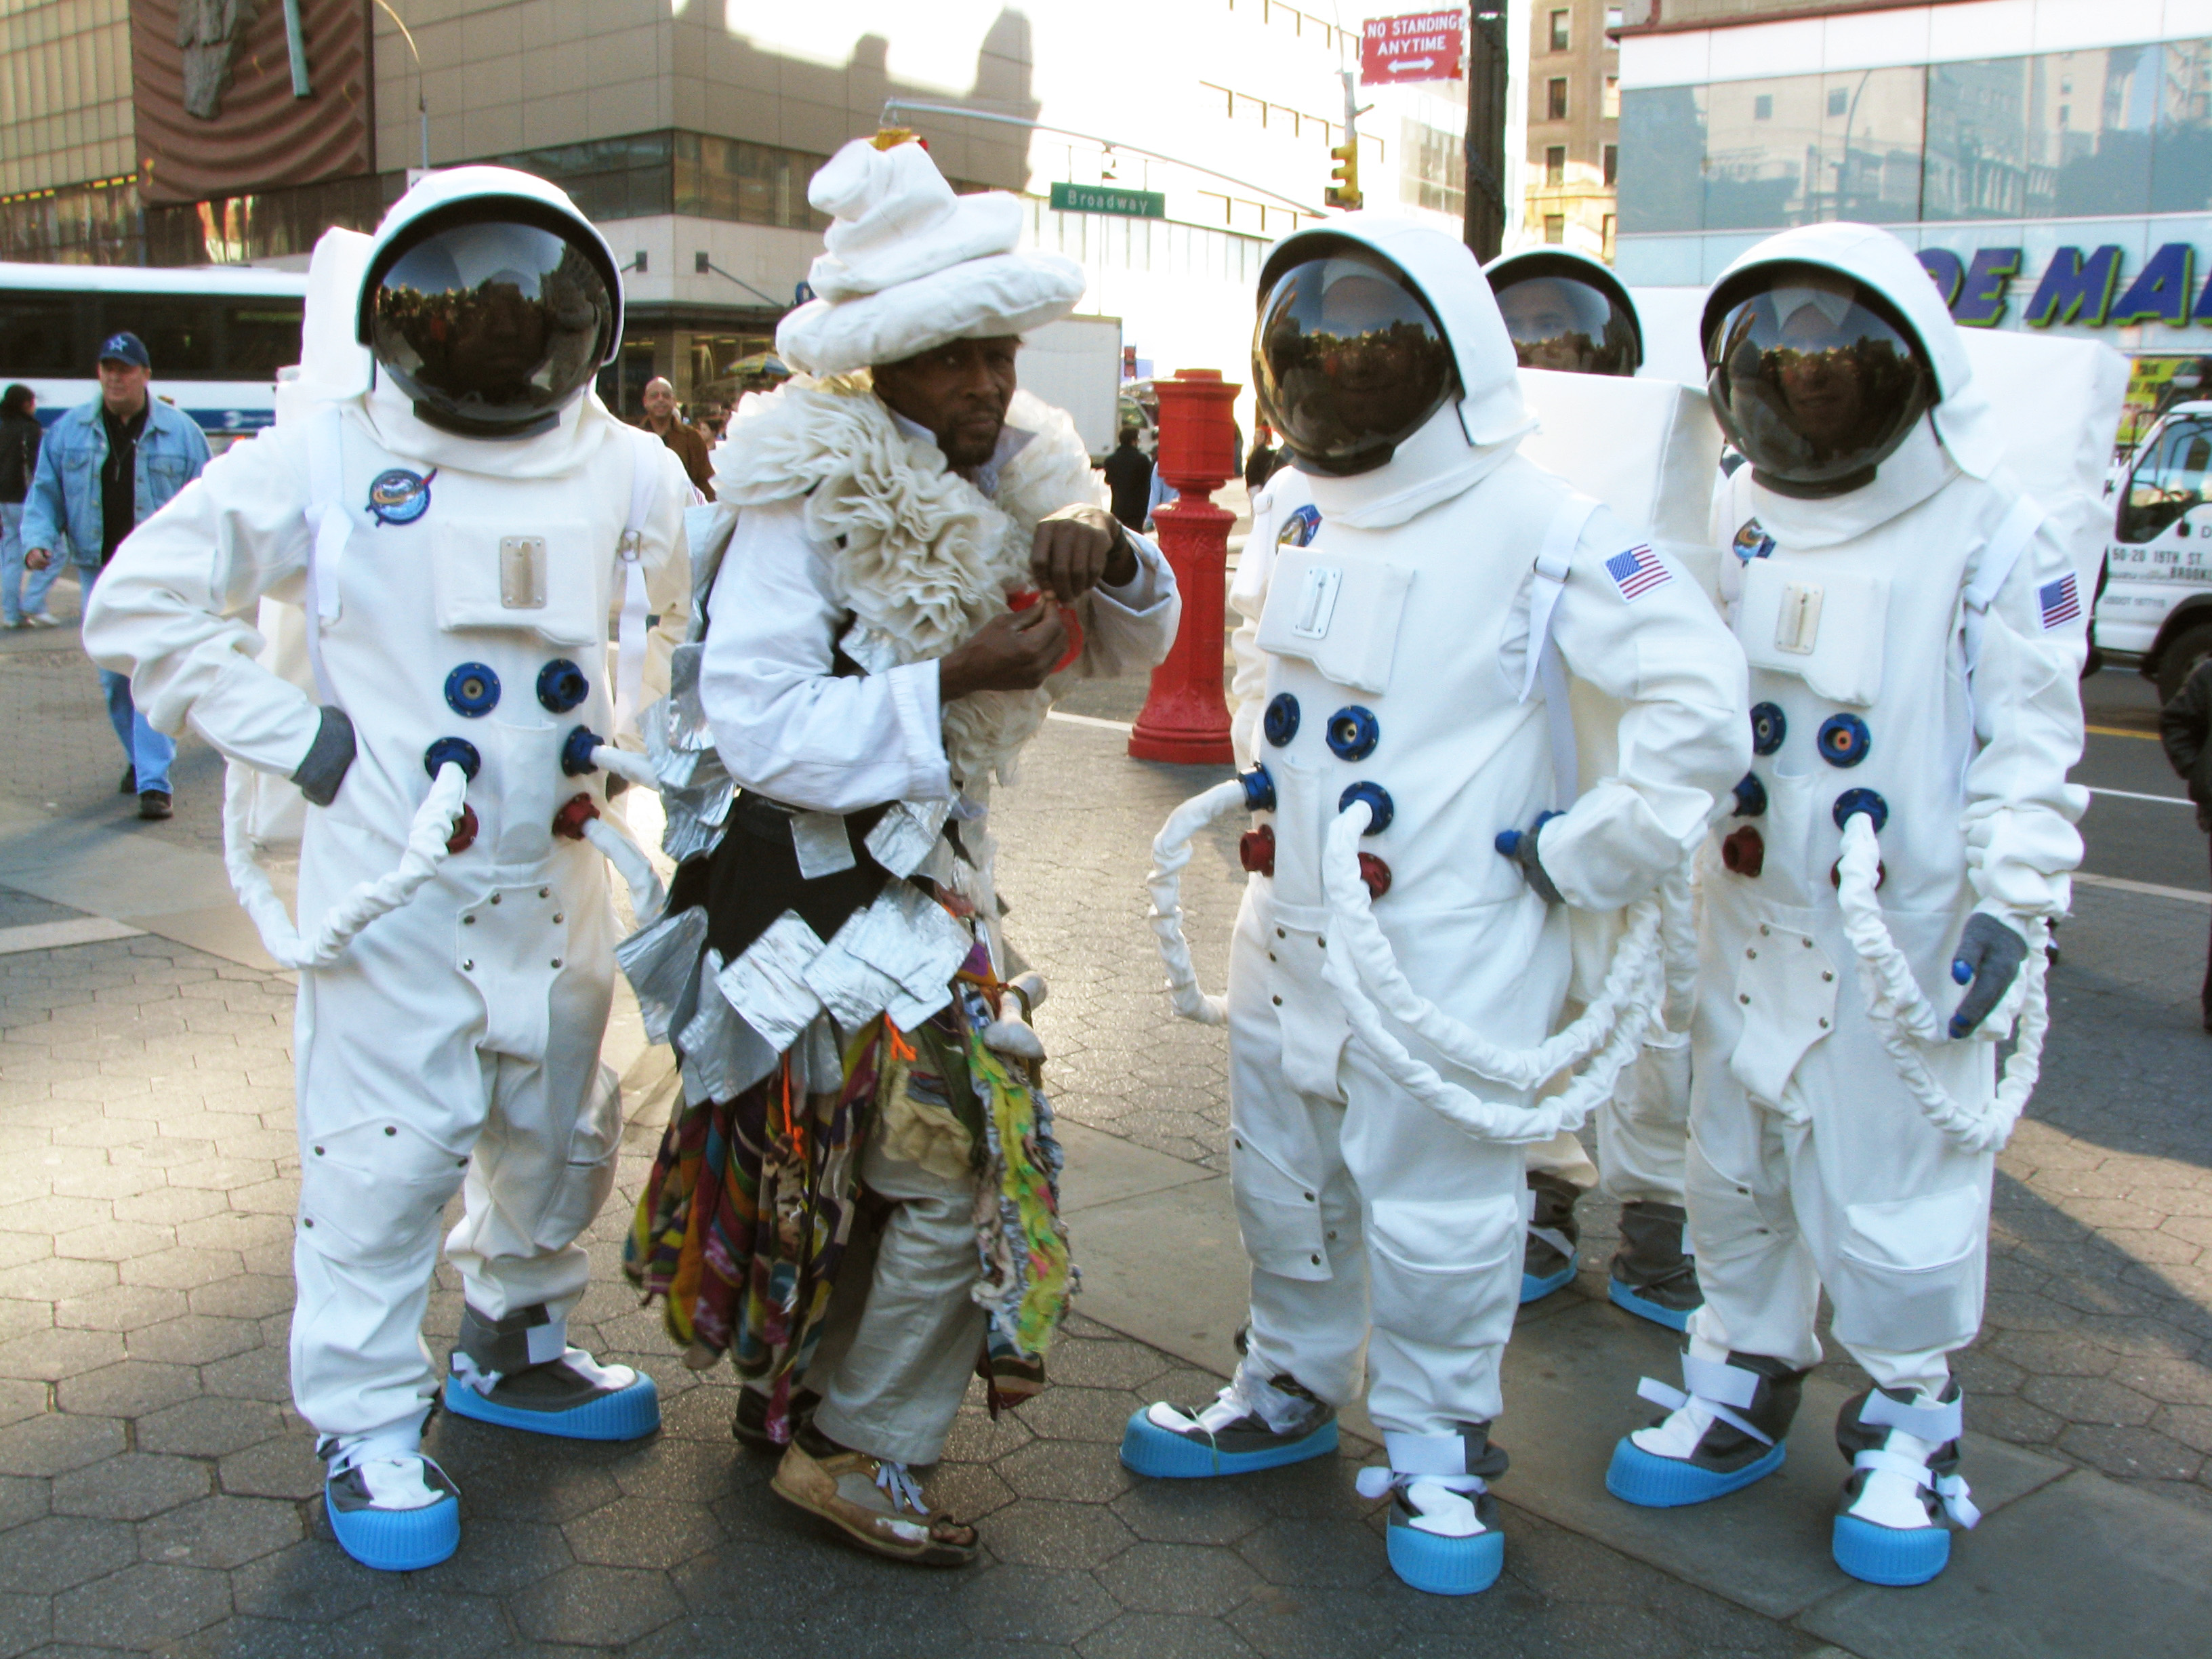 Wendell Headley poses with Astronauts